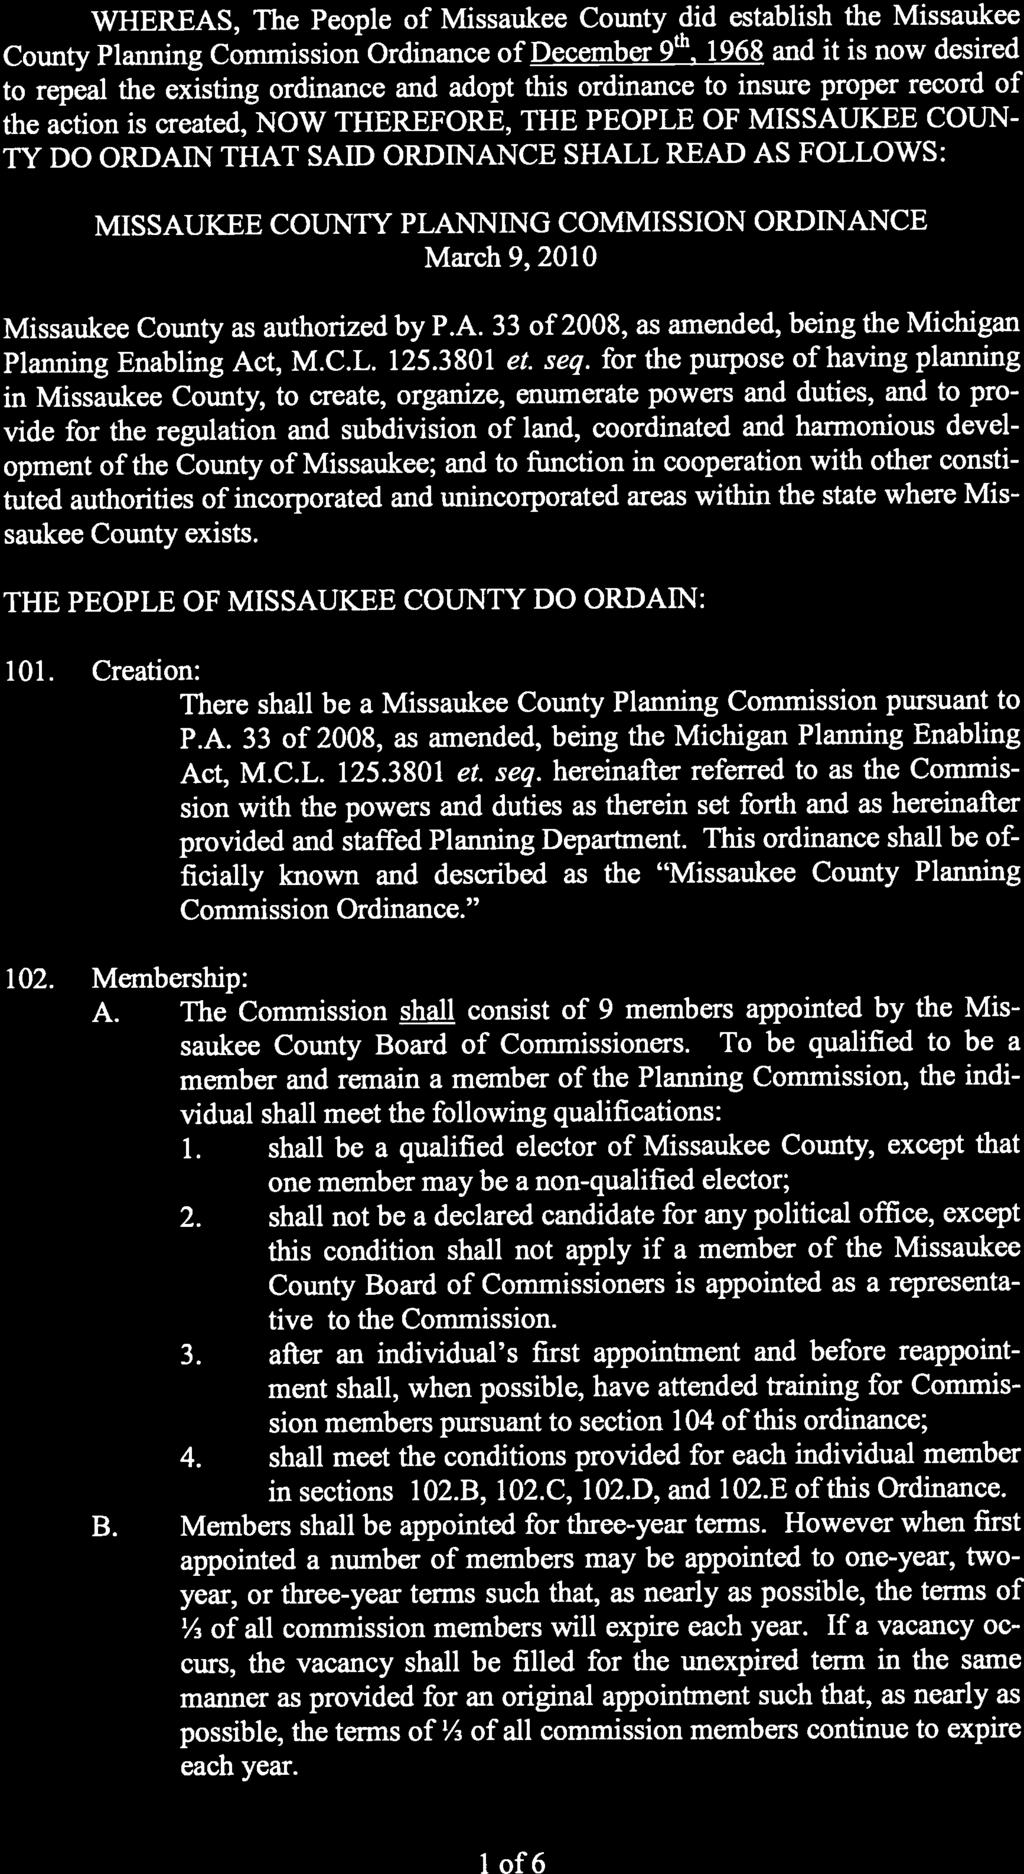 MISSAUKEE COUNTY PLANNING COMMISSION ORDINANCE STATE OF MICHIGAN COUNTY OF MIS SAUKEE COUNTY BOARD OF COMMISSIONERS MARCH 9, 2010 WHEREAS, The People of Missaukee County did establish the Missaukee